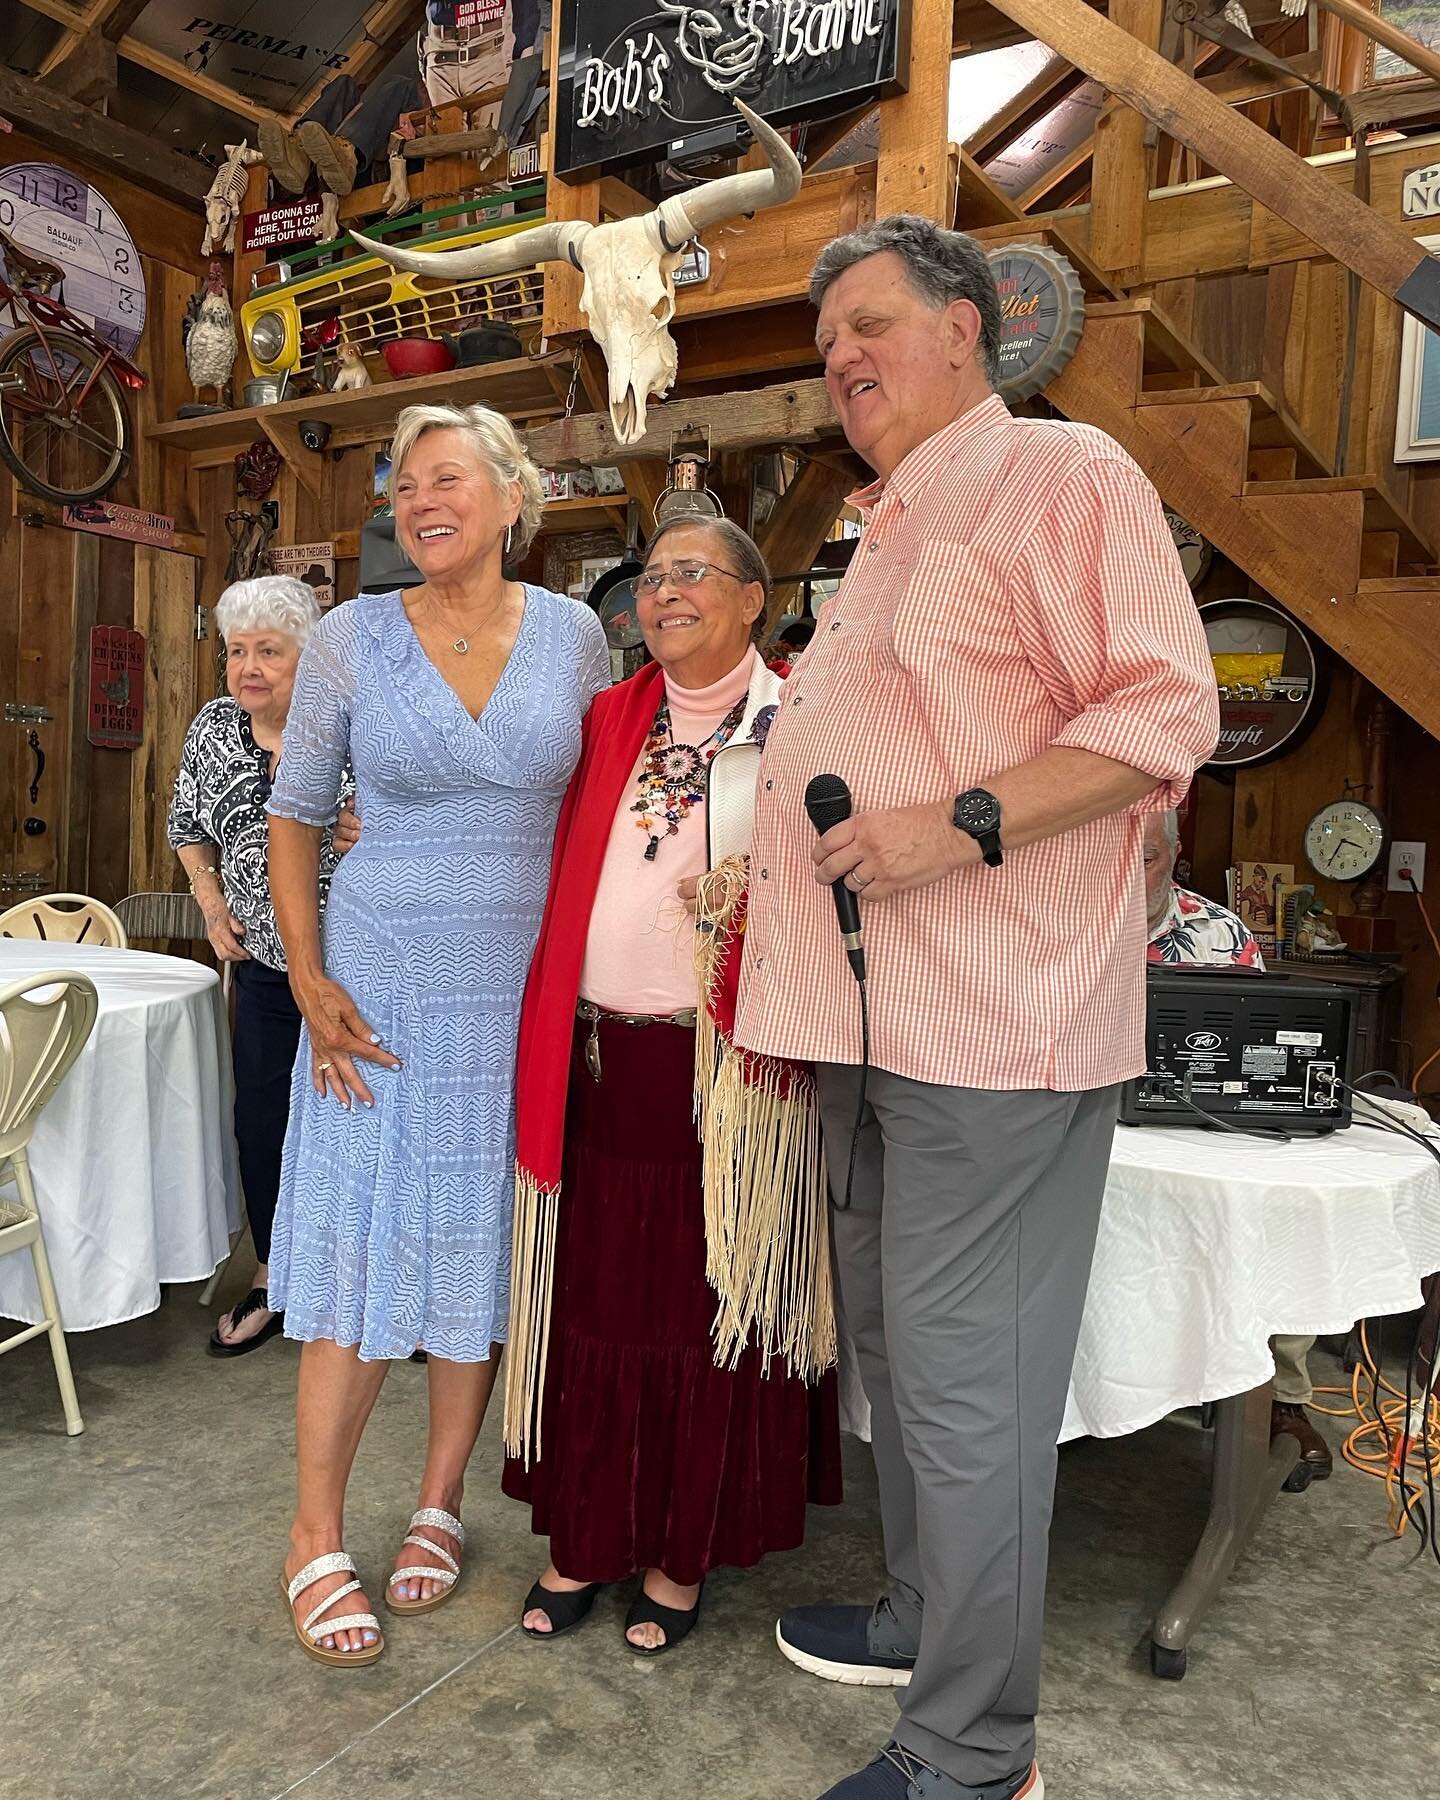 Really beautiful Native American ceremony and celebration of love yesterday between my Mother and her sweet love Don. 

A family friend, Barbara Locklear, of the Lumbee tribe, has taught N.A. tradition at Wake Forest, UNC, and countless other places.